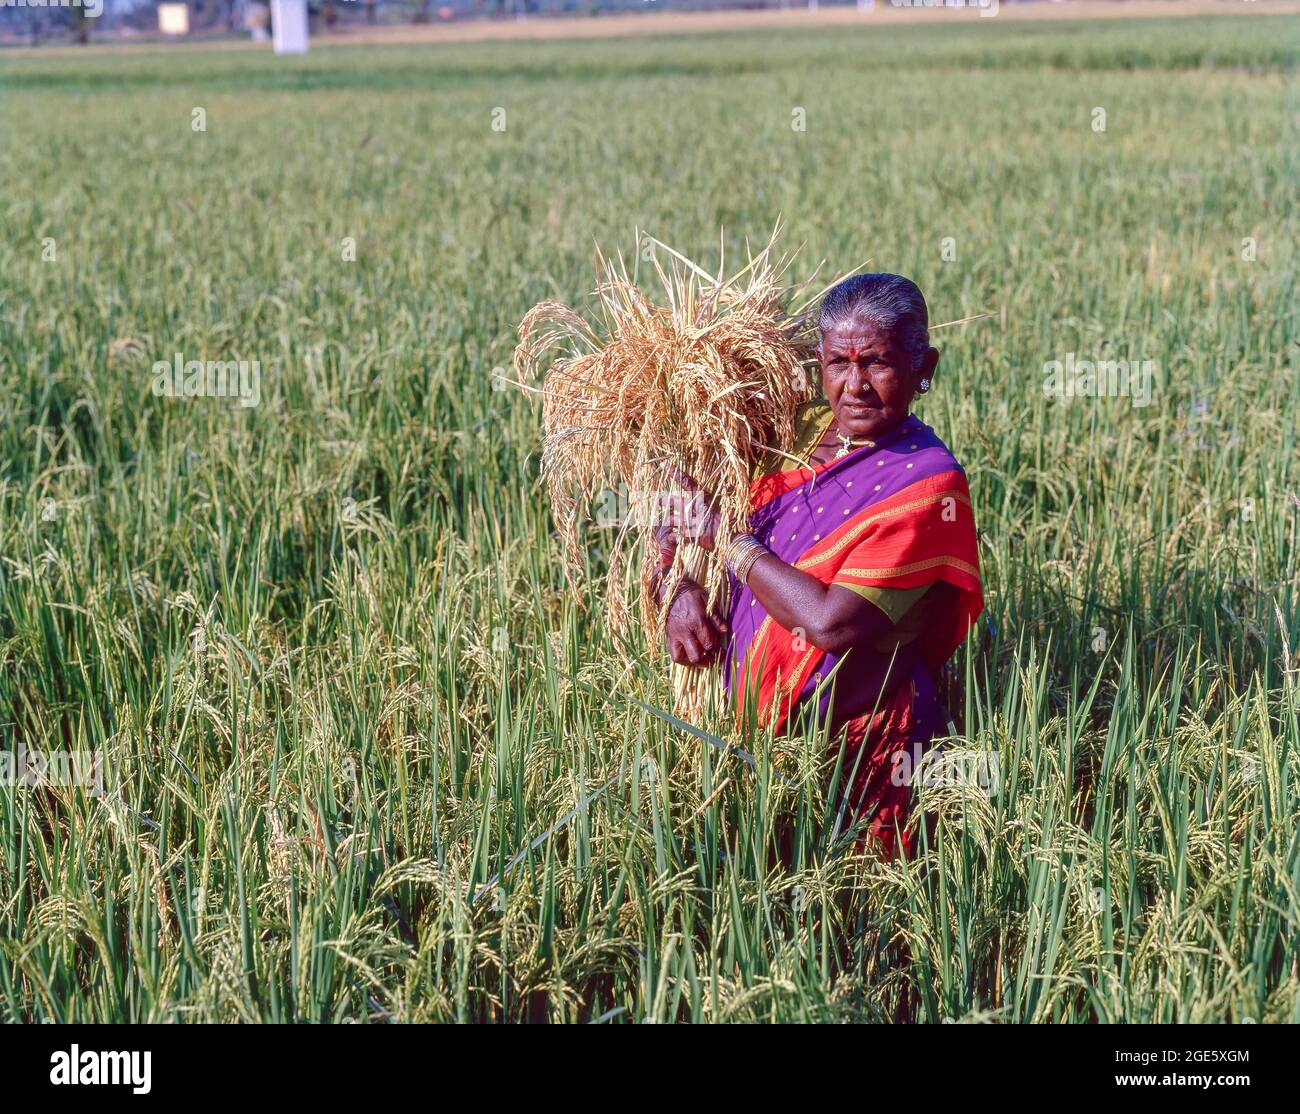 Old woman holding a bunch of sheaves, paddy grains and standing in a rice field, Coimbatore, Tamil Nadu, India Stock Photo